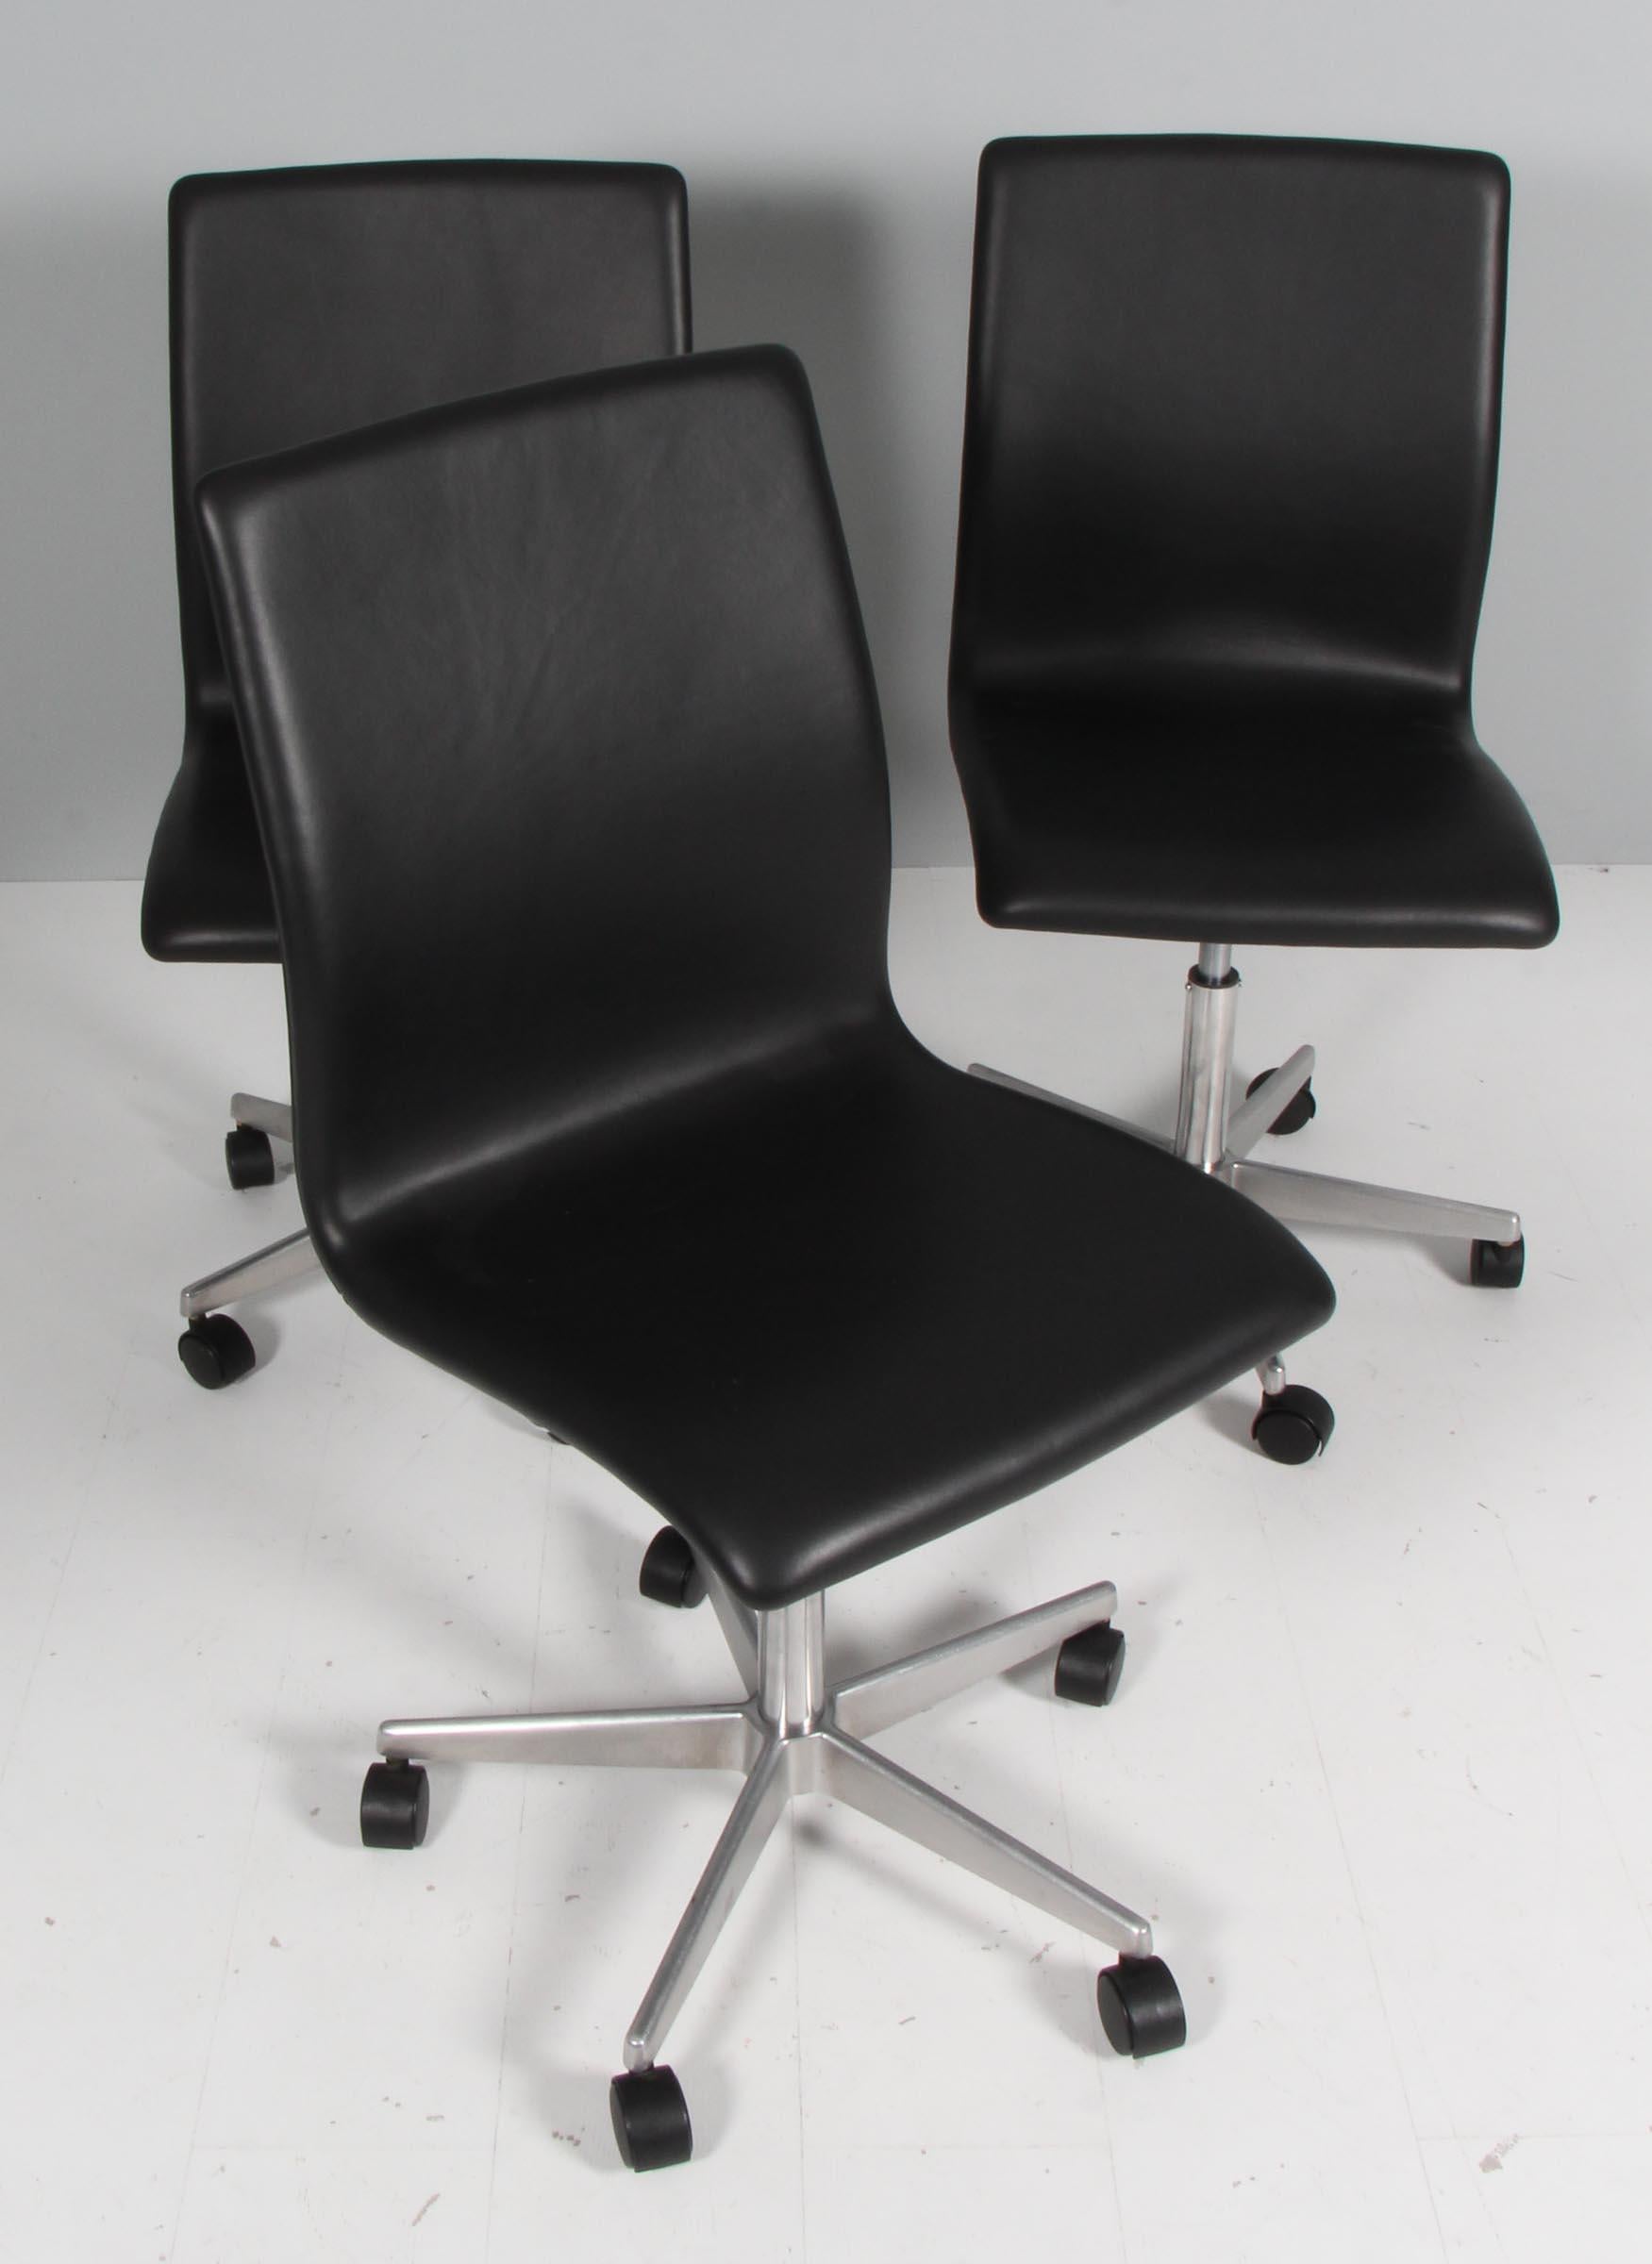 Arne Jacobsen Oxford office chair five star base in aluminum. Turnable and with wheels. With height adjustment

New upholstered with black pure full grain aniline leather.

Made by Fritz Hansen.

Original designed for the Oxford university.